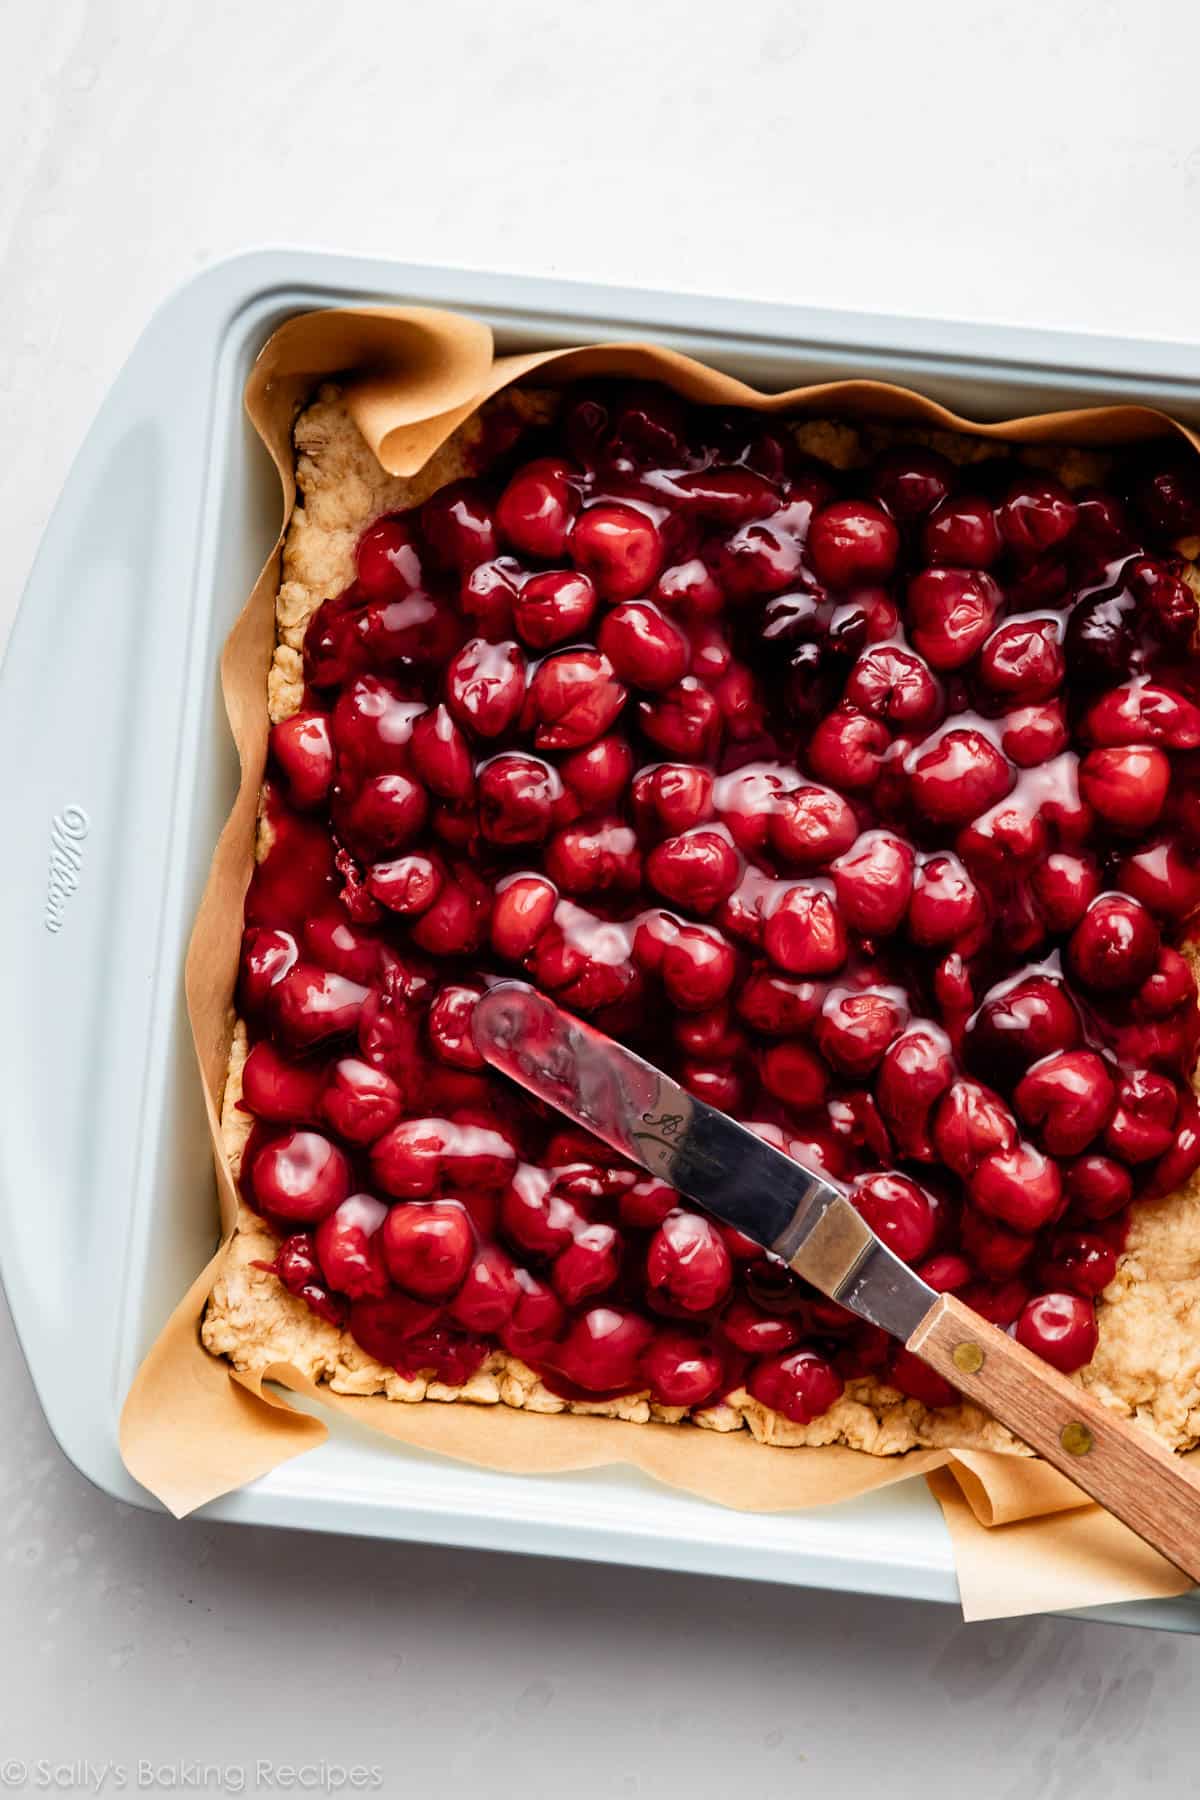 cherries being spread over a crust in a lined baking pan.